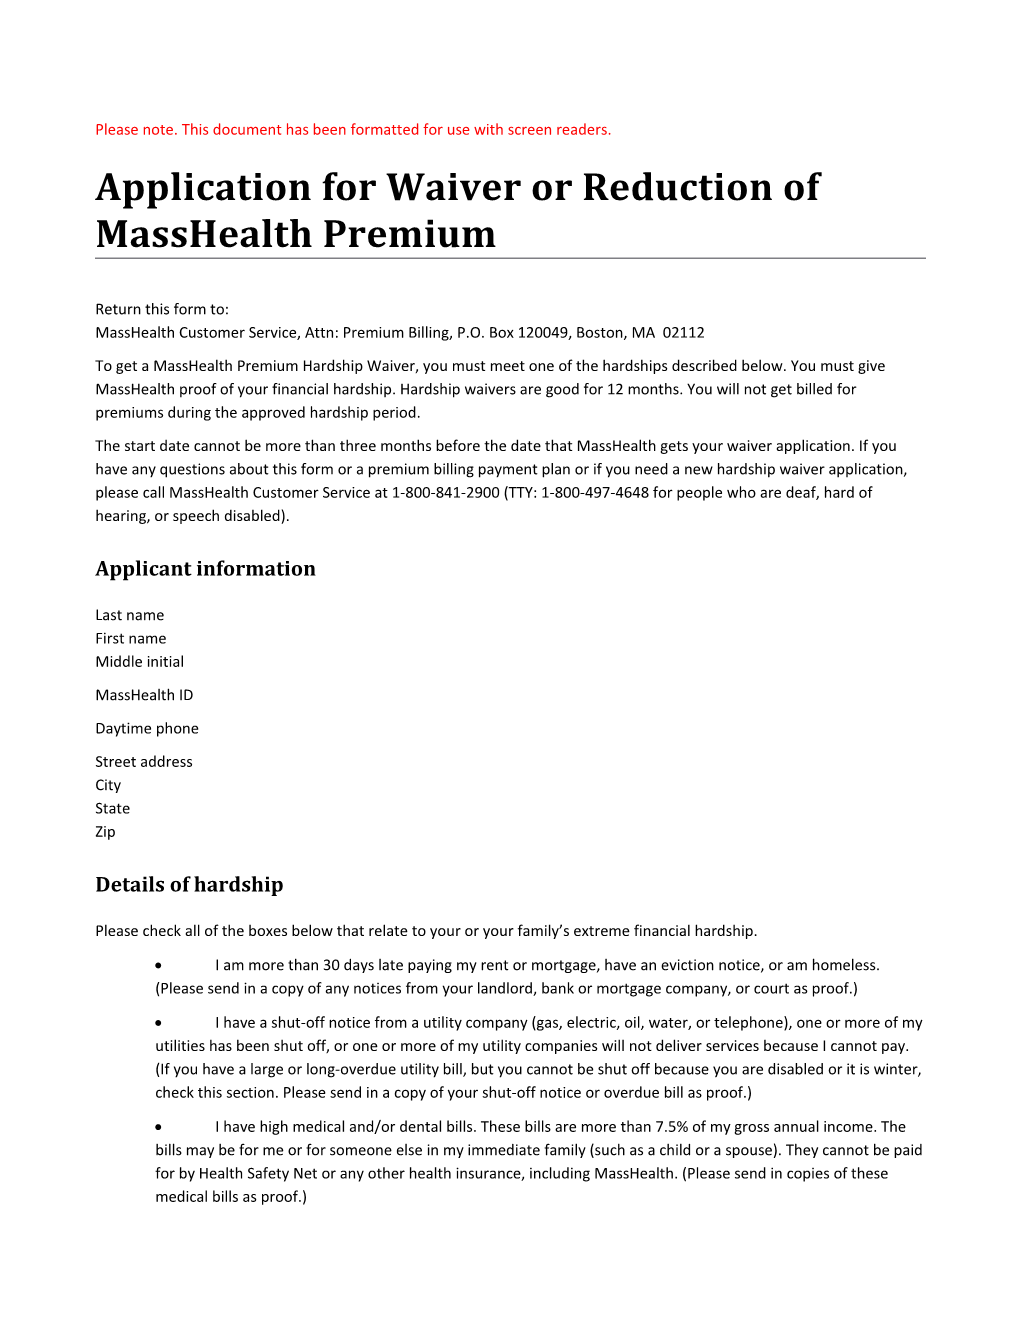 Application for Waiver Or Reduction of Masshealth Premium